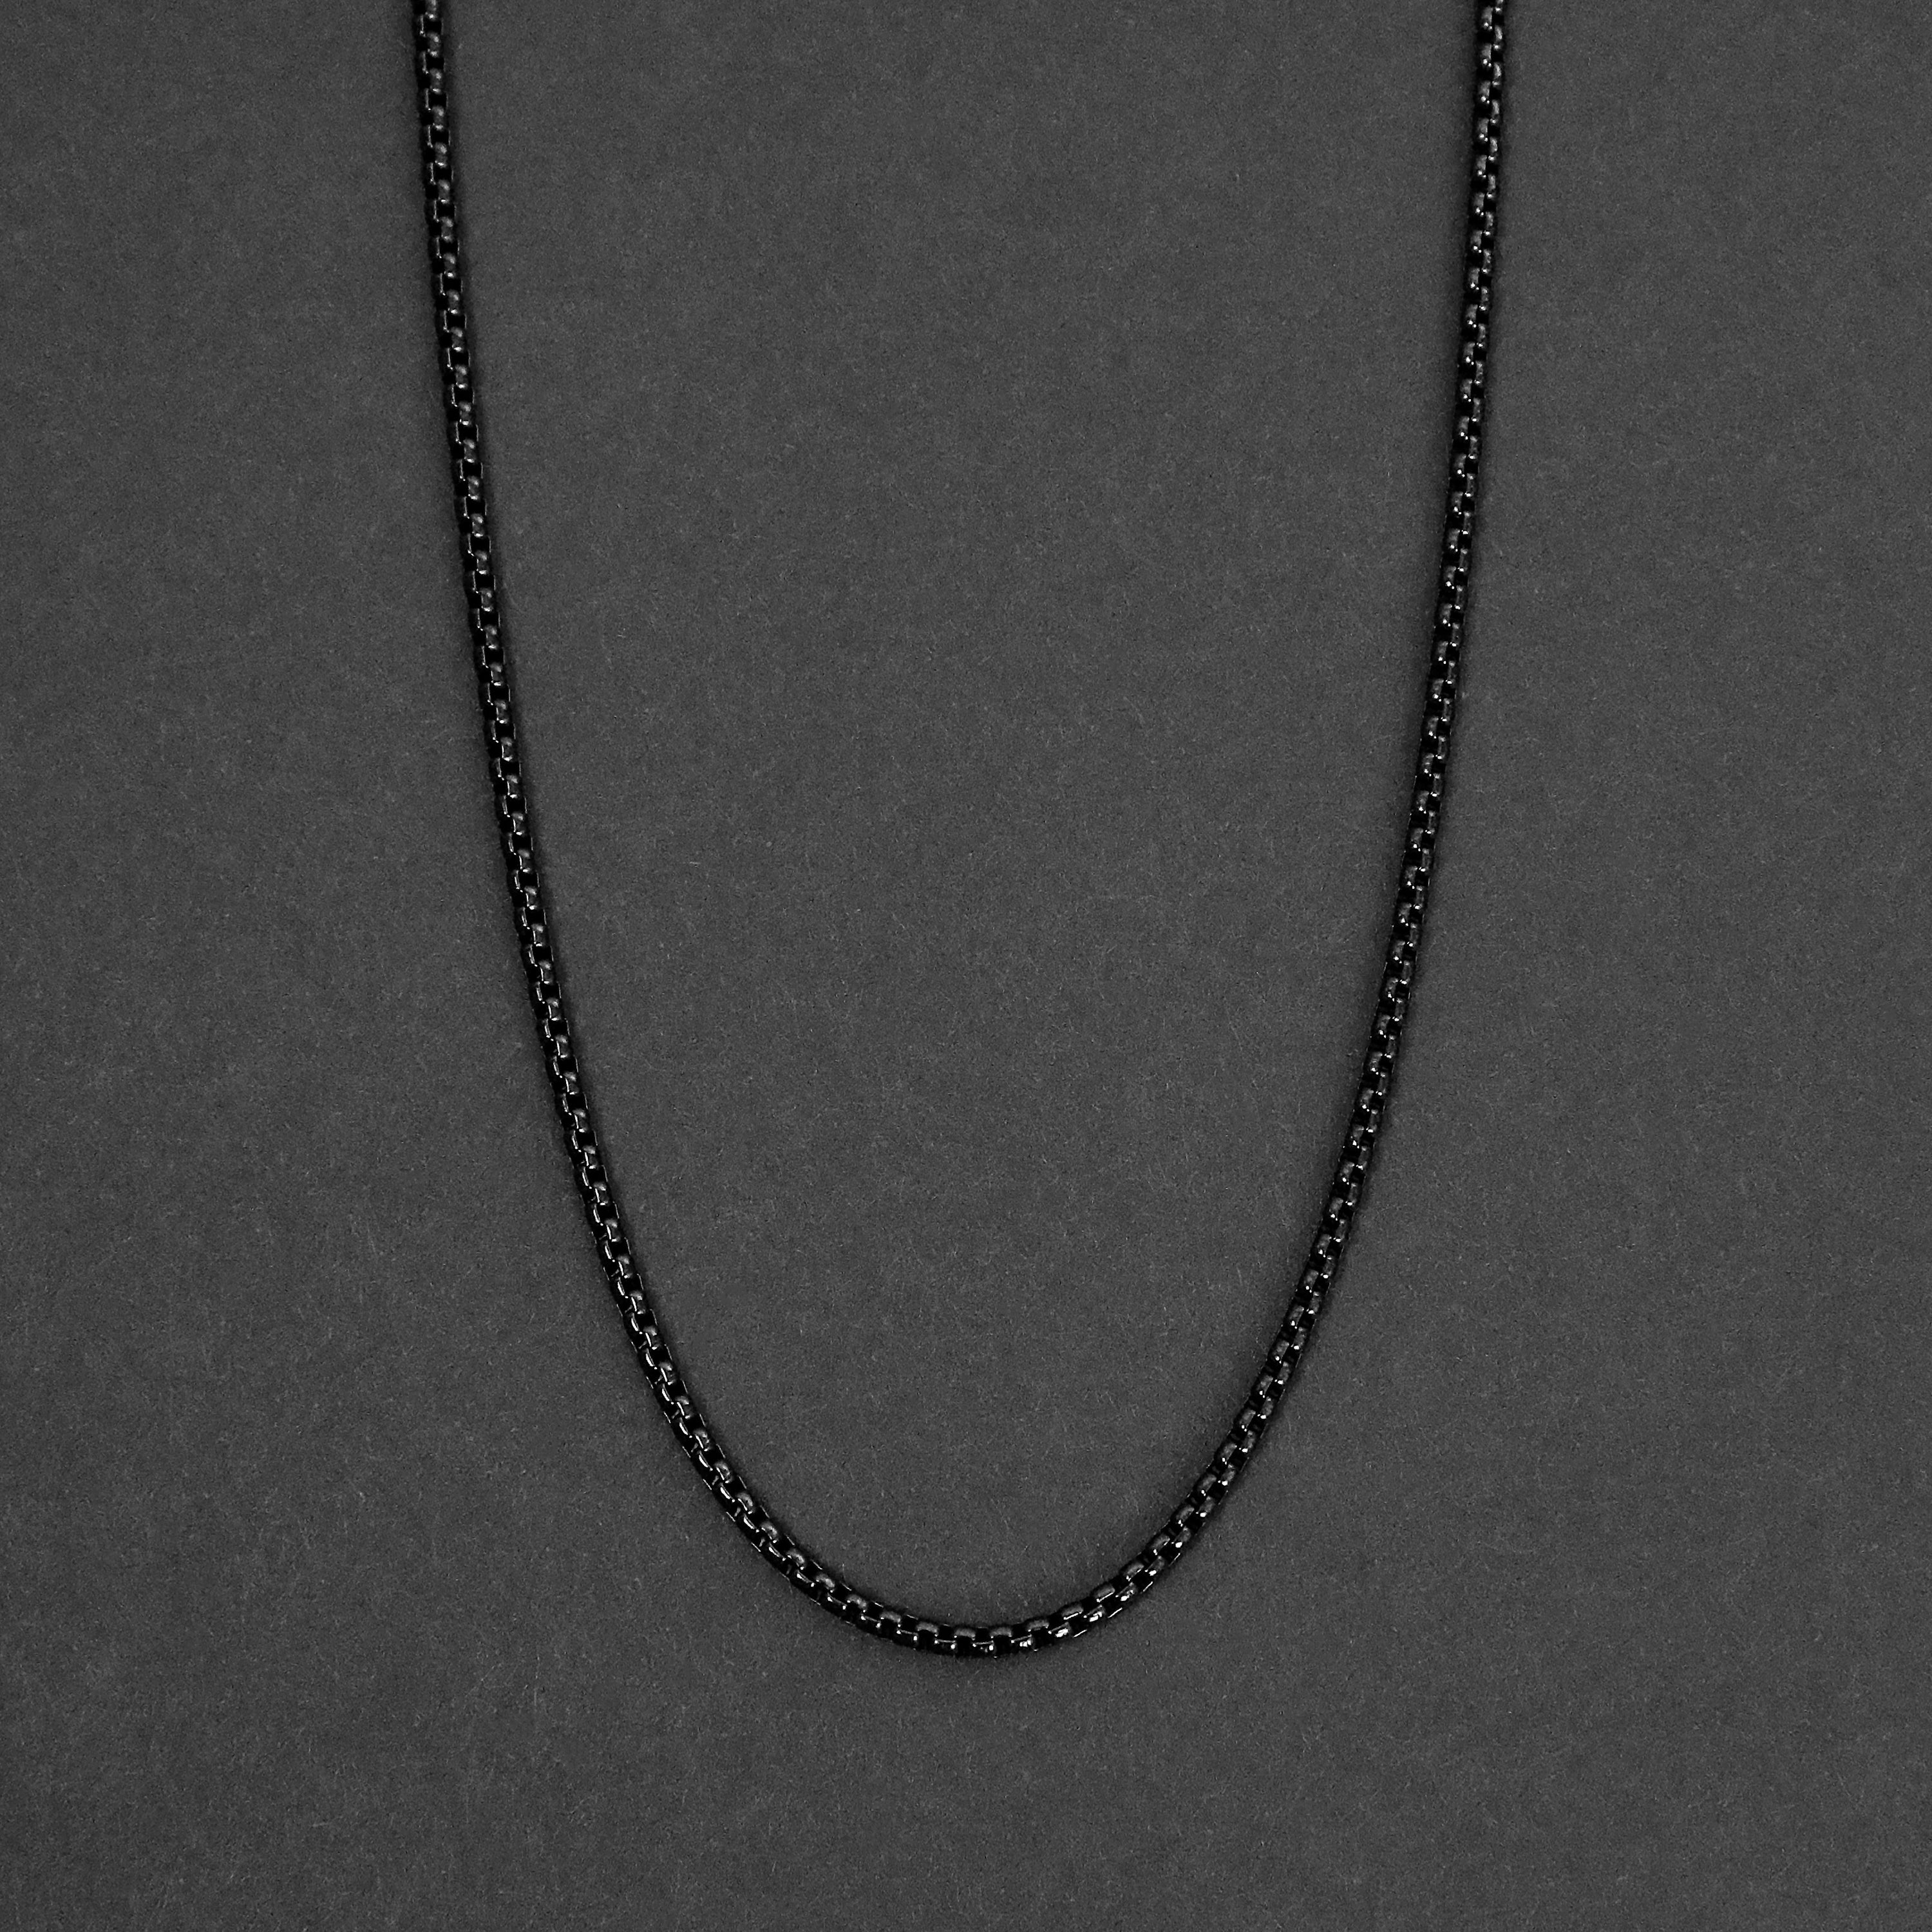 Steel Chain Necklace Men's Necklace Masculine Box Chain Stainless Steel  Chain Waterproof Jewelry Necklace by Modern Out 